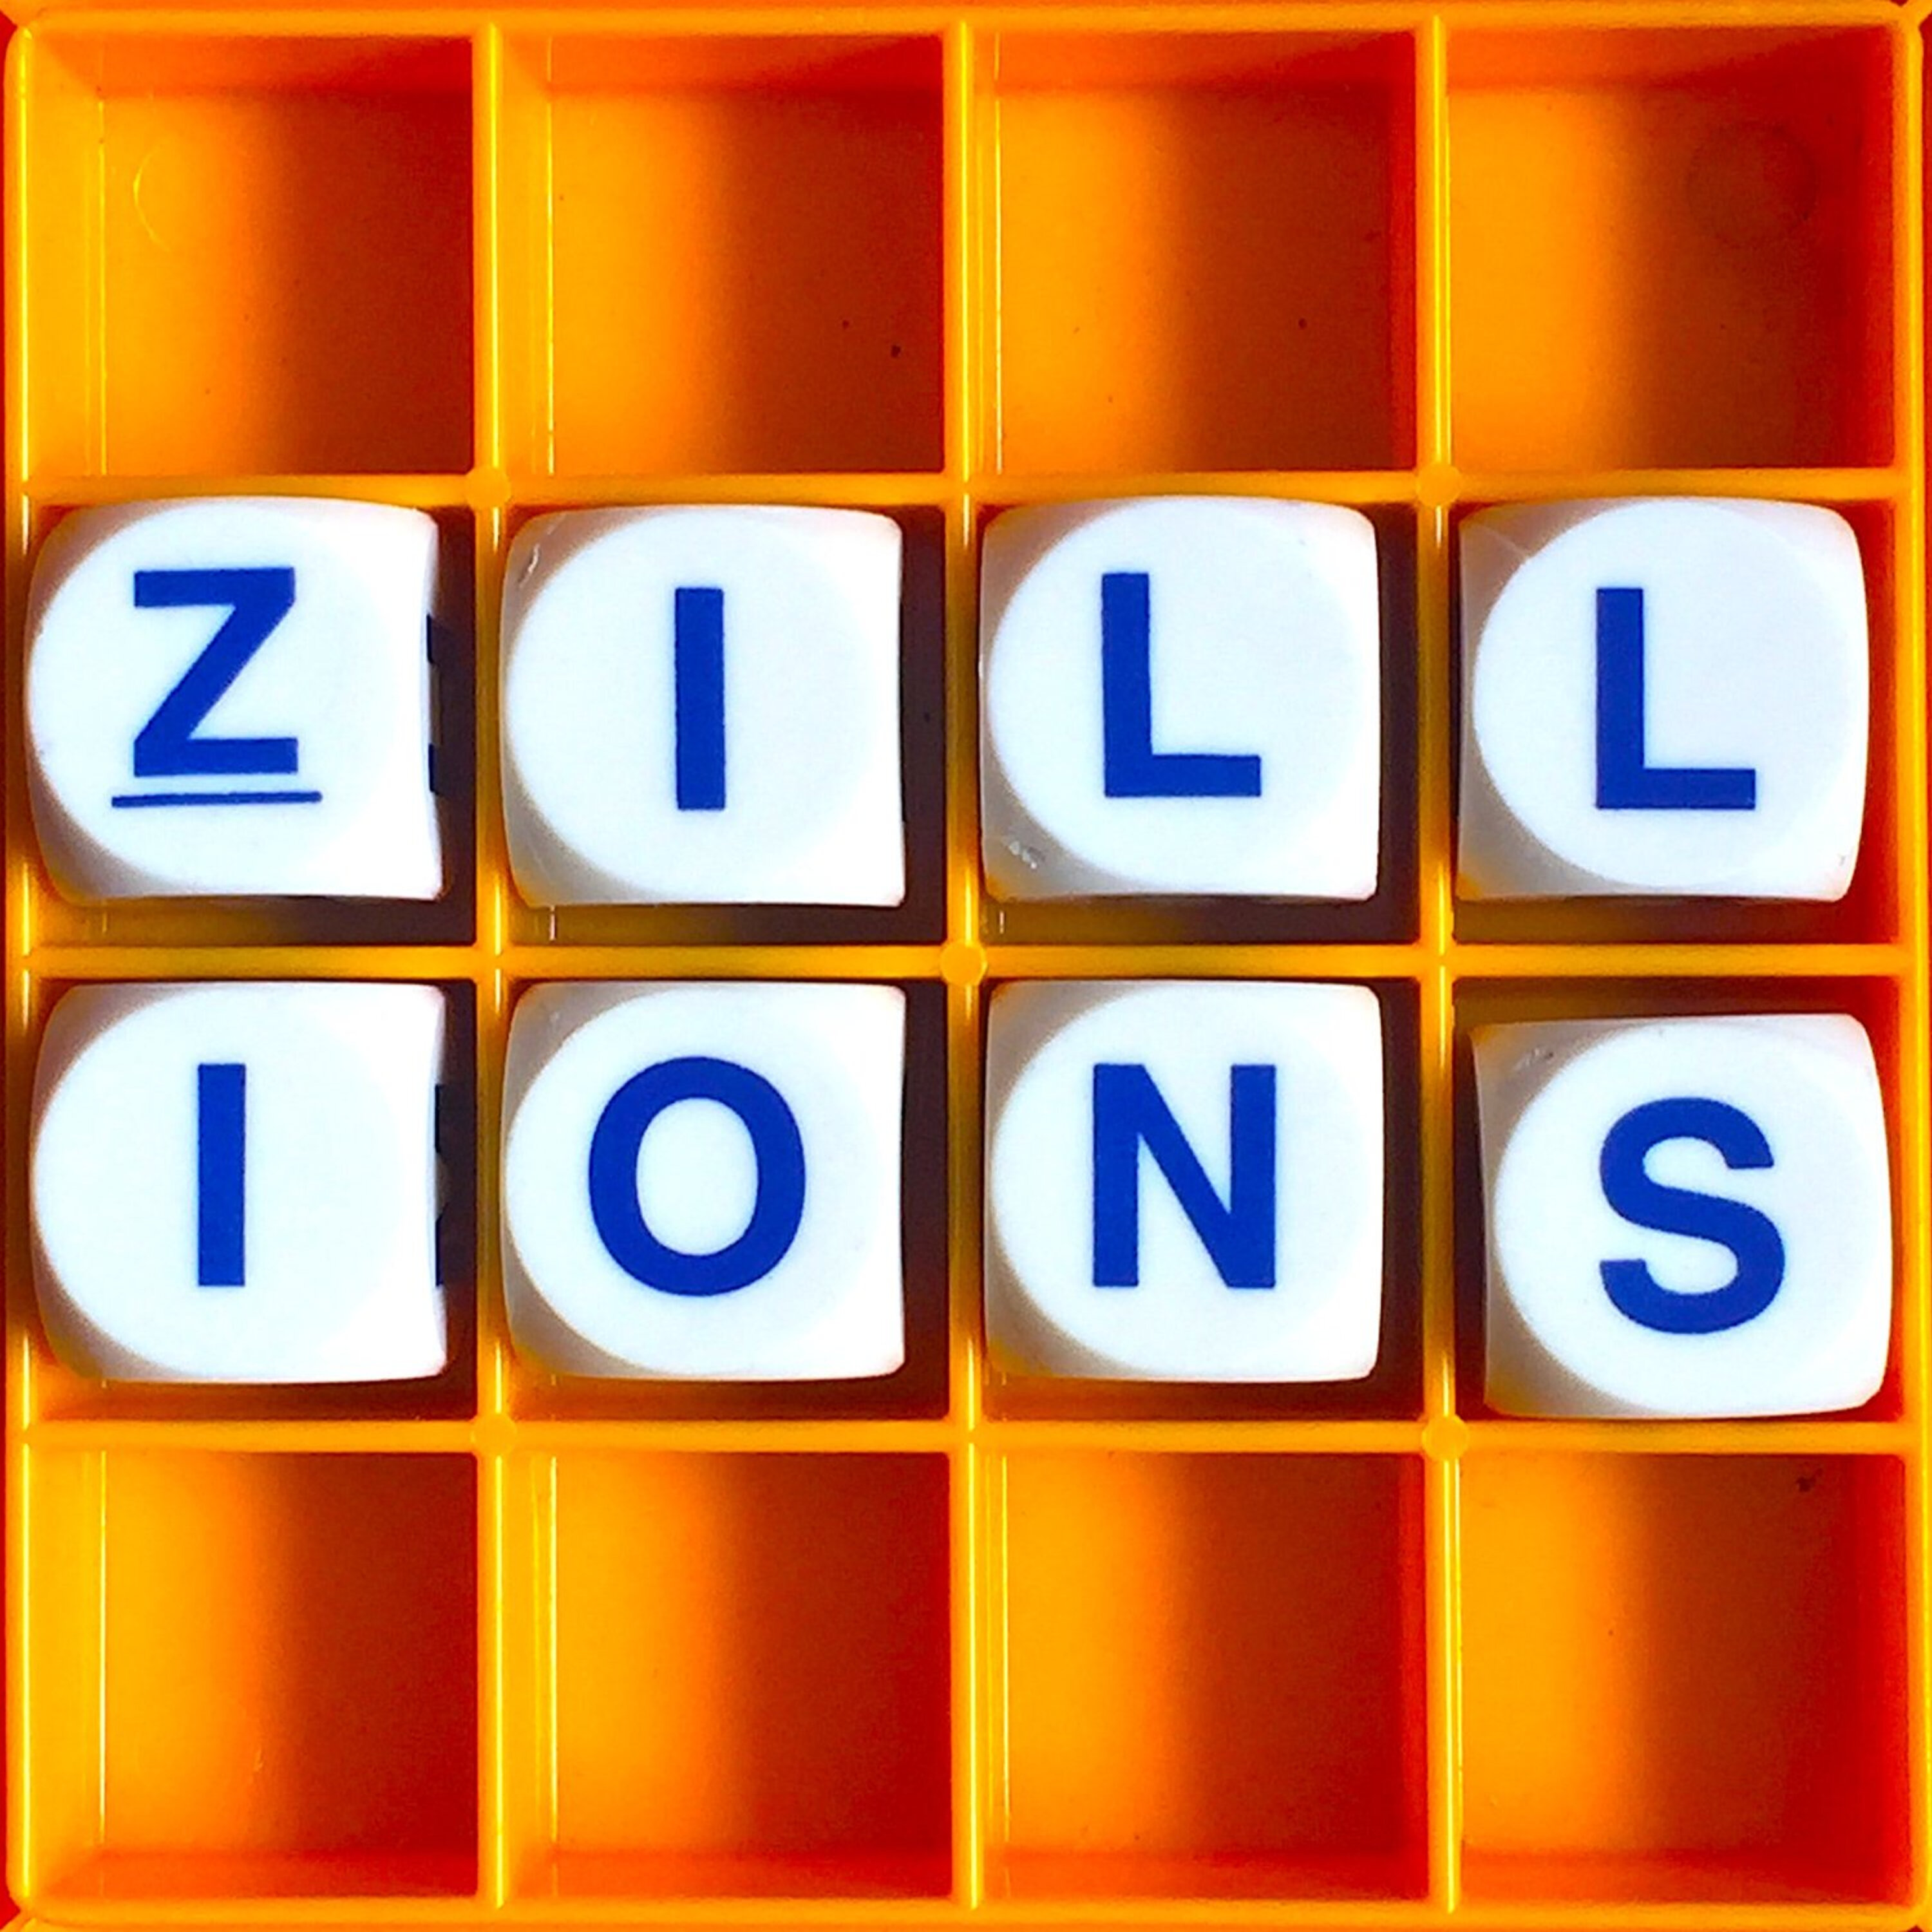 Thumbnail for "60. Zillions".